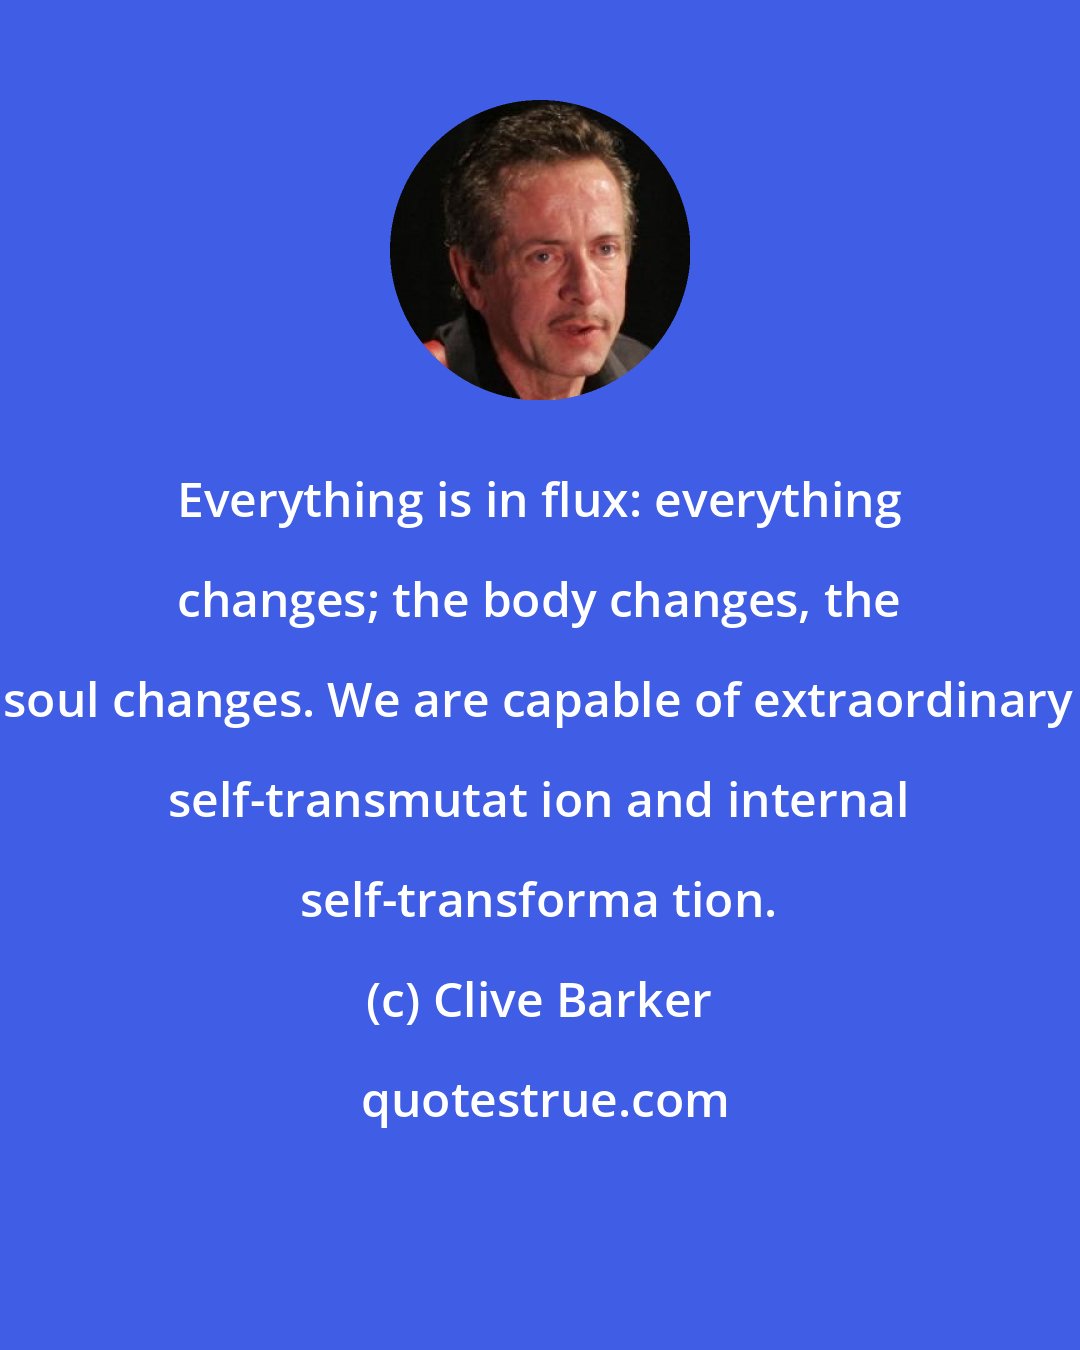 Clive Barker: Everything is in flux: everything changes; the body changes, the soul changes. We are capable of extraordinary self-transmutat ion and internal self-transforma tion.